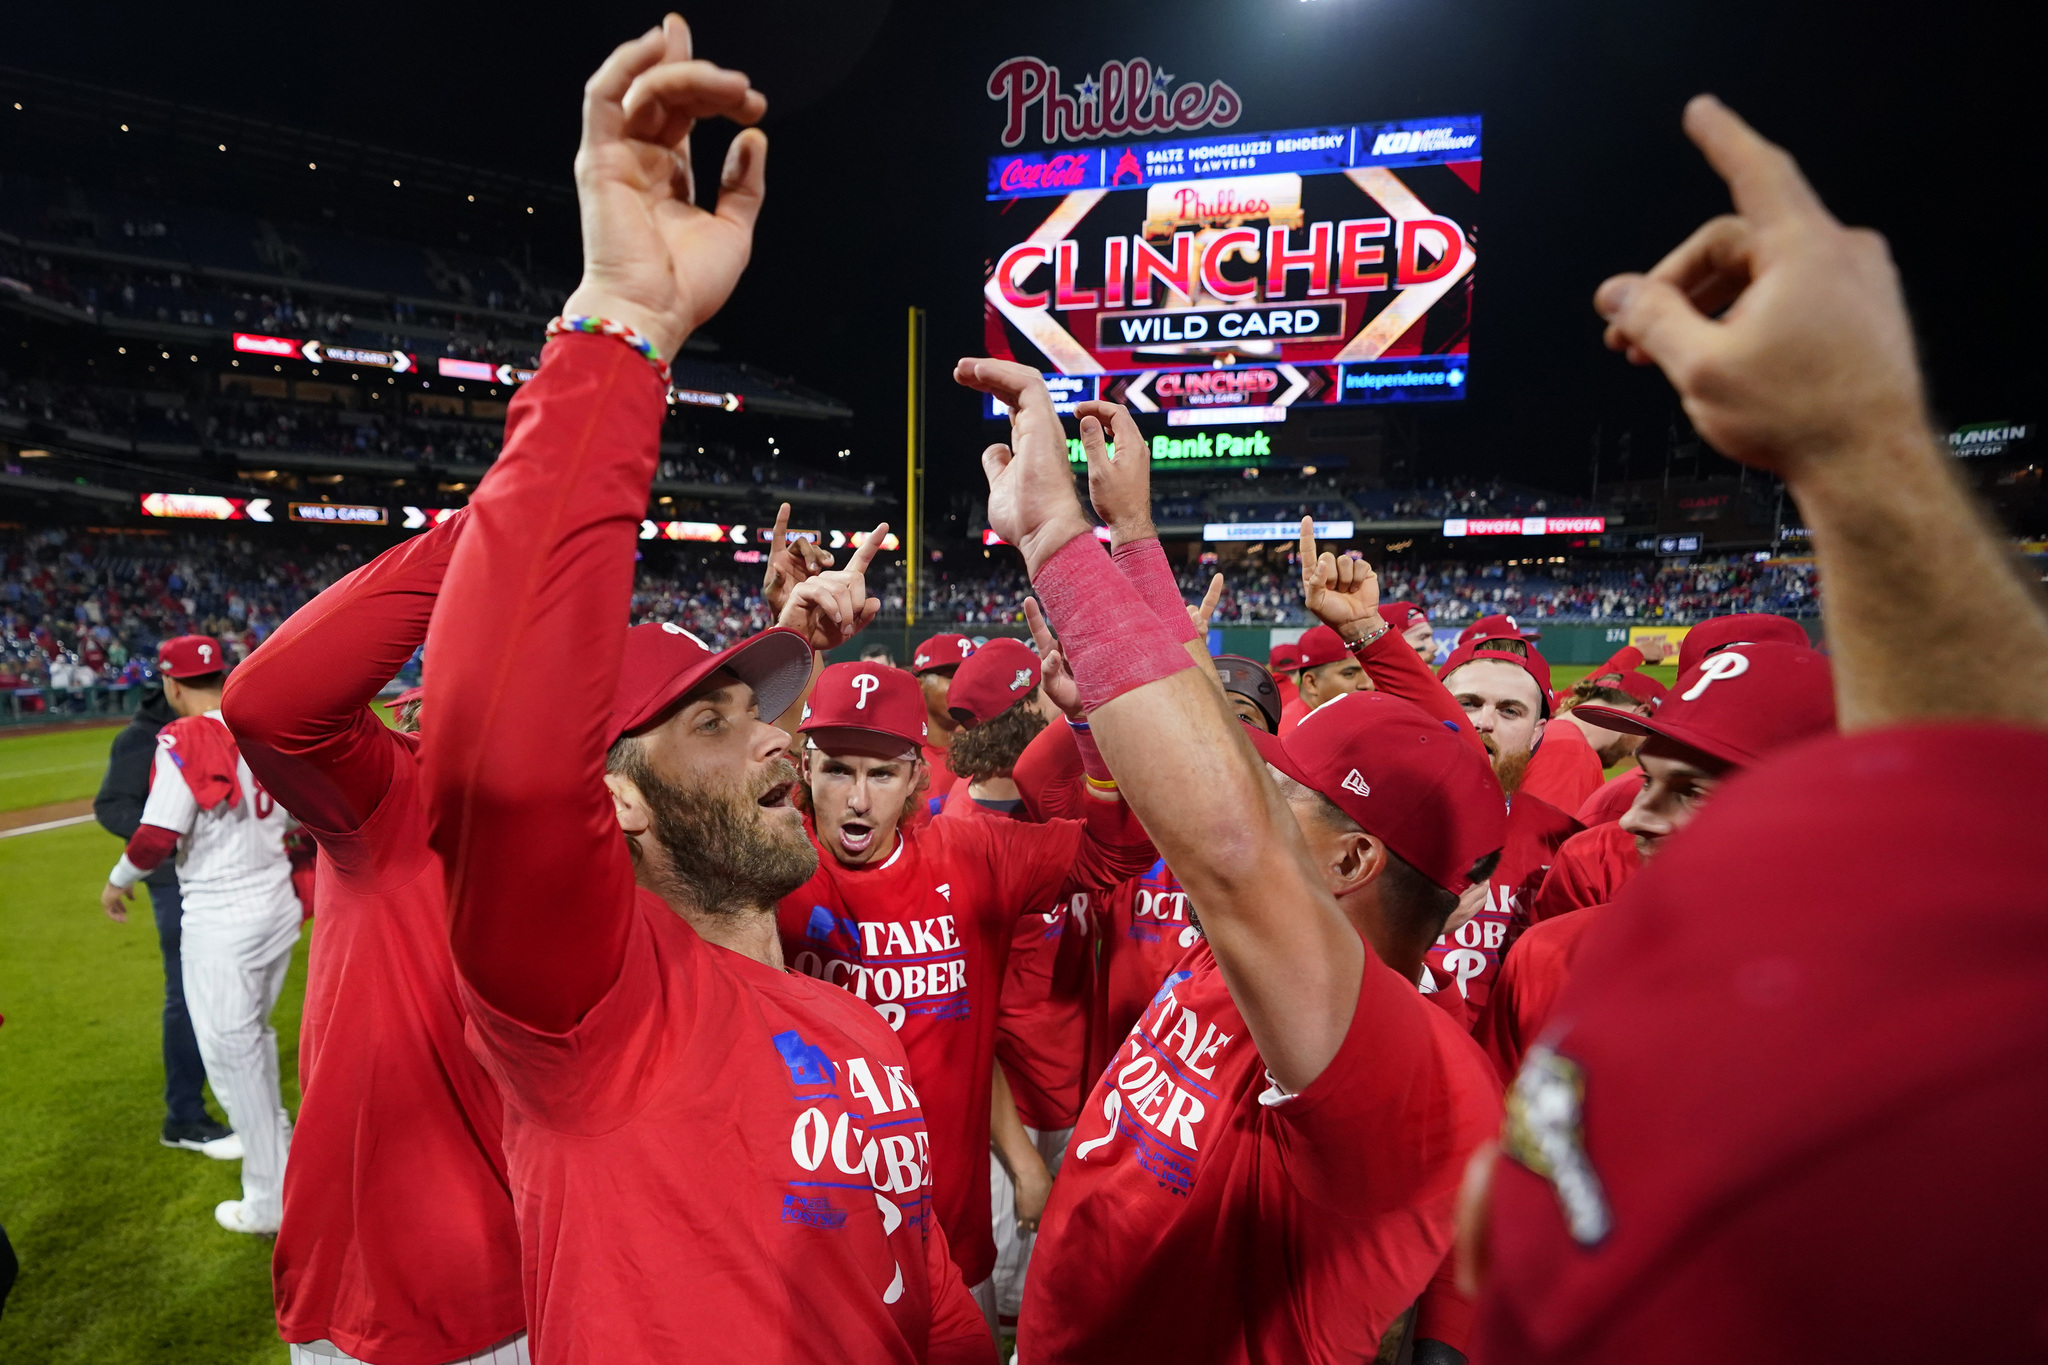 Philadelphia Phillies Bryce Harper celebrates with teammates after their win in a baseball game against the Pittsburgh Pirates to clinch a wild-card playoff spot.